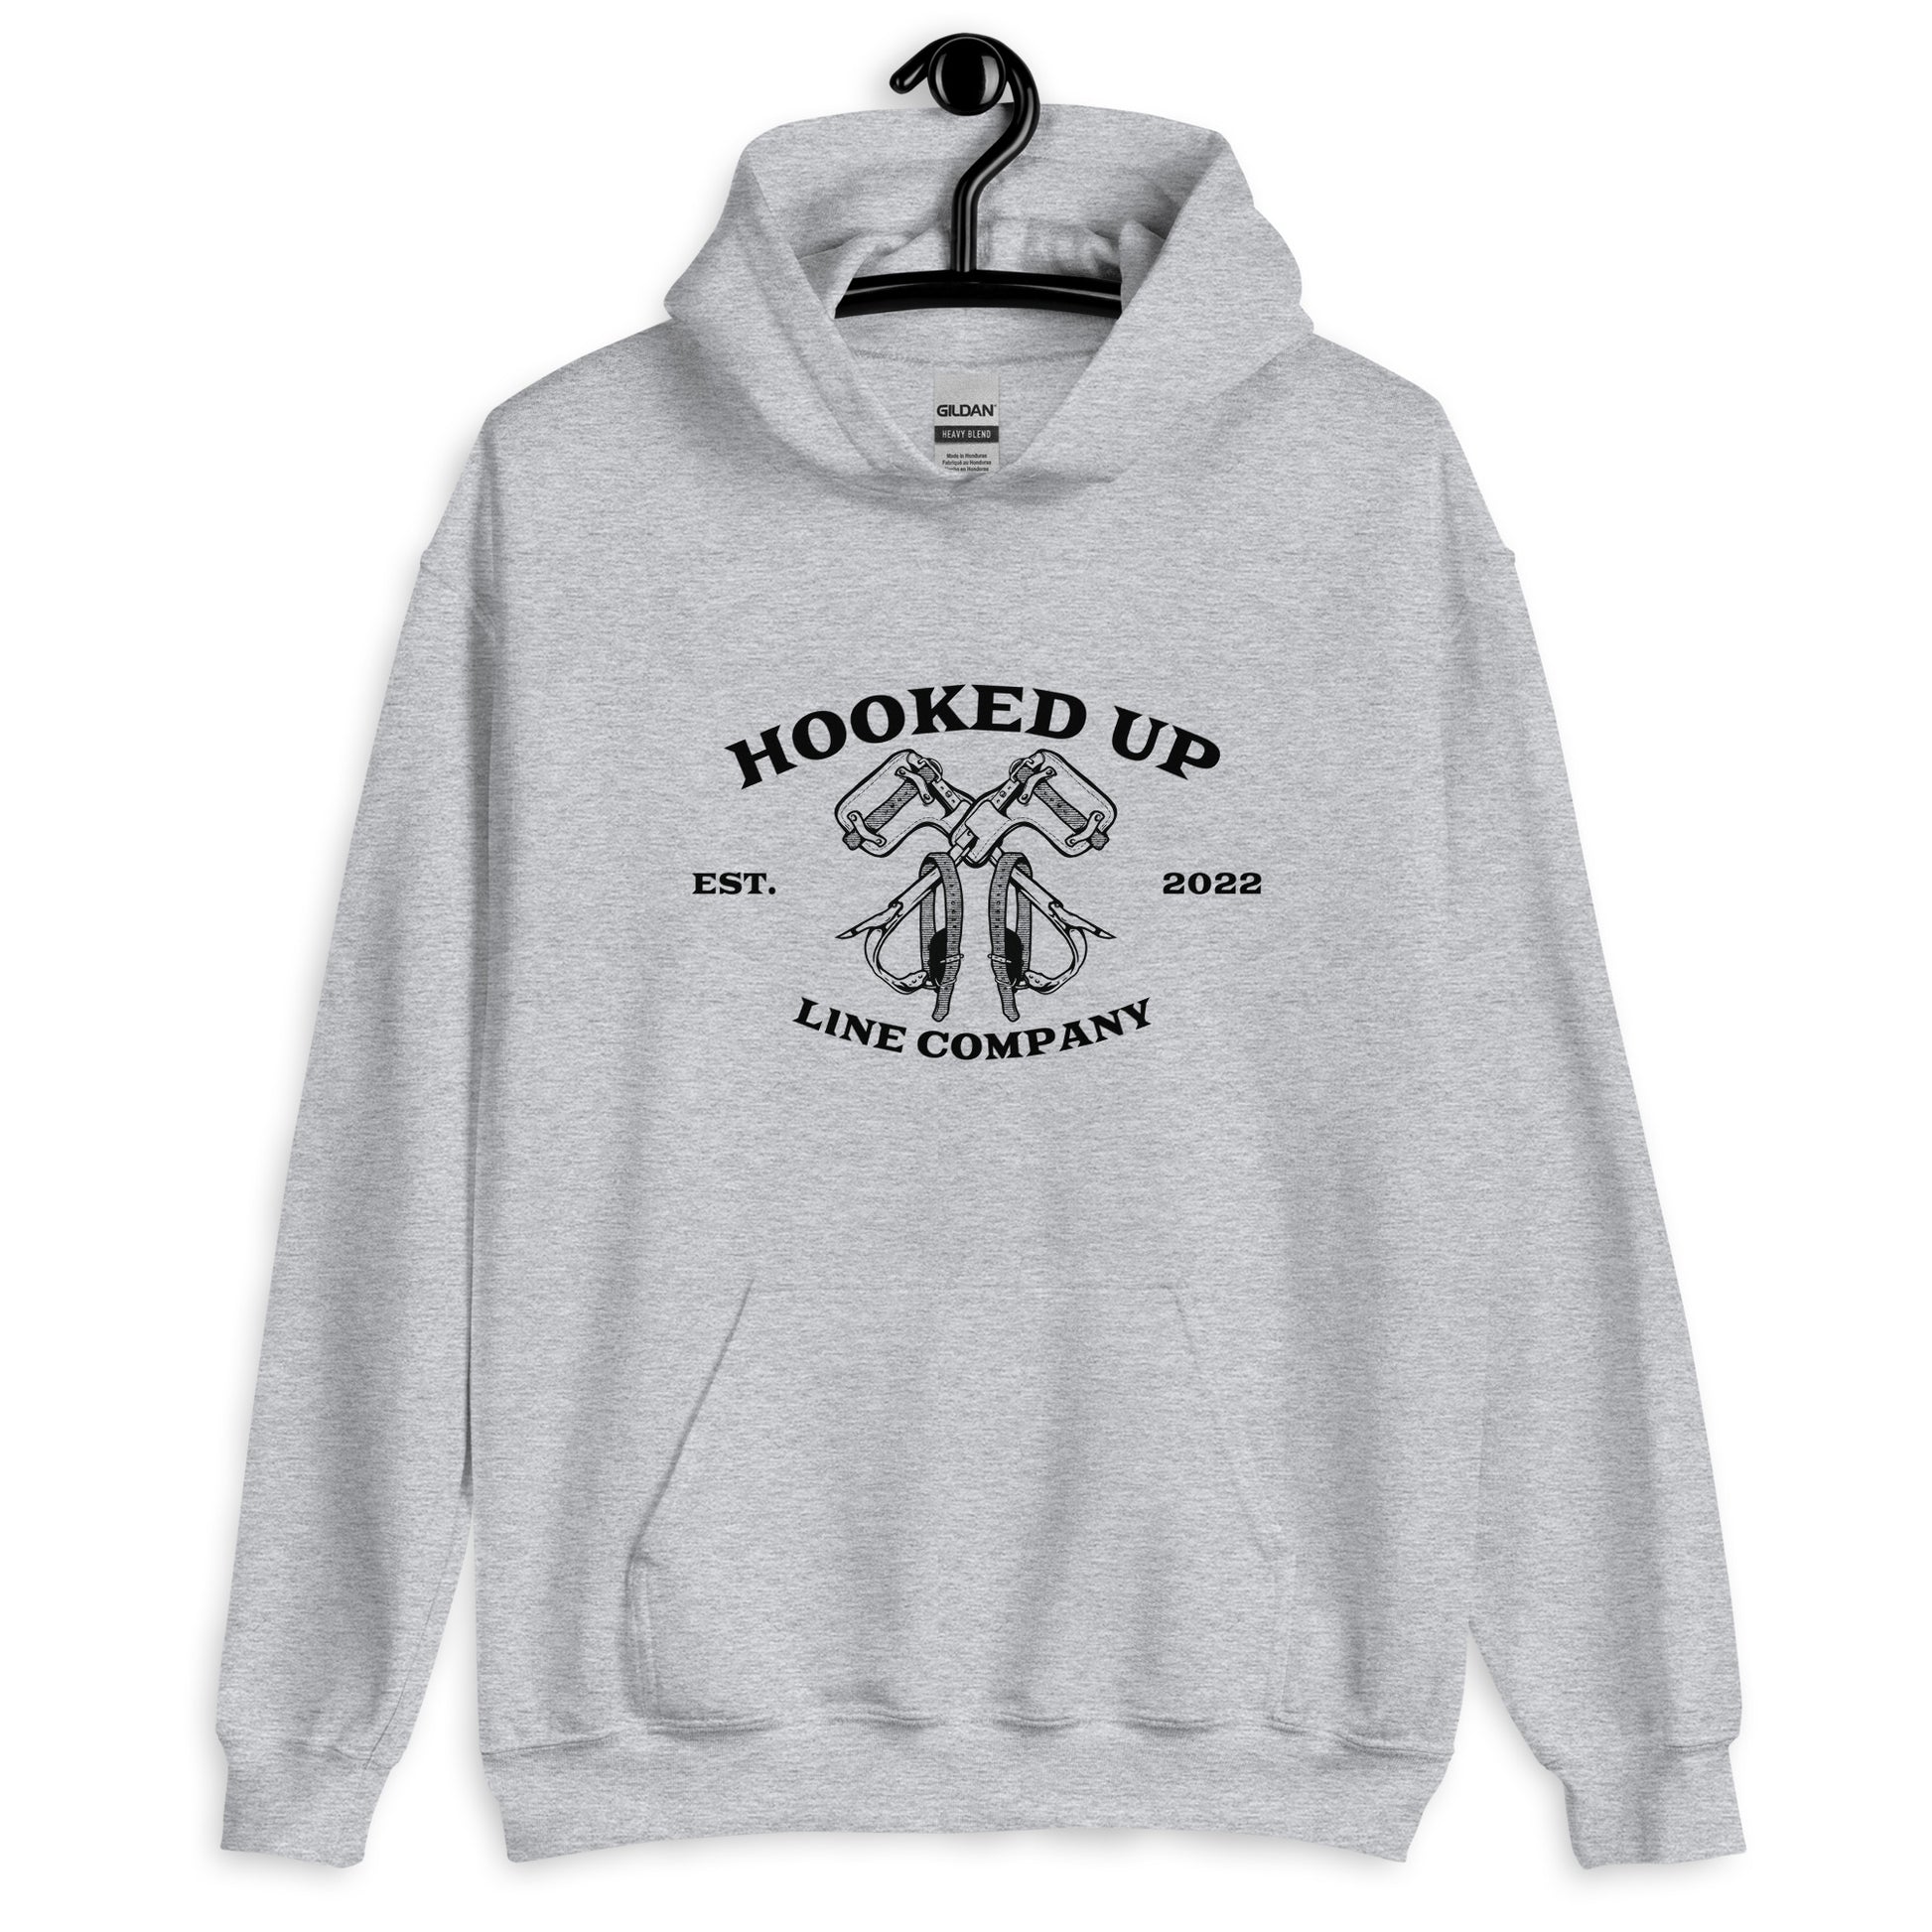 Hooked Up Lineman Hoodie – Hooked Up Line Company